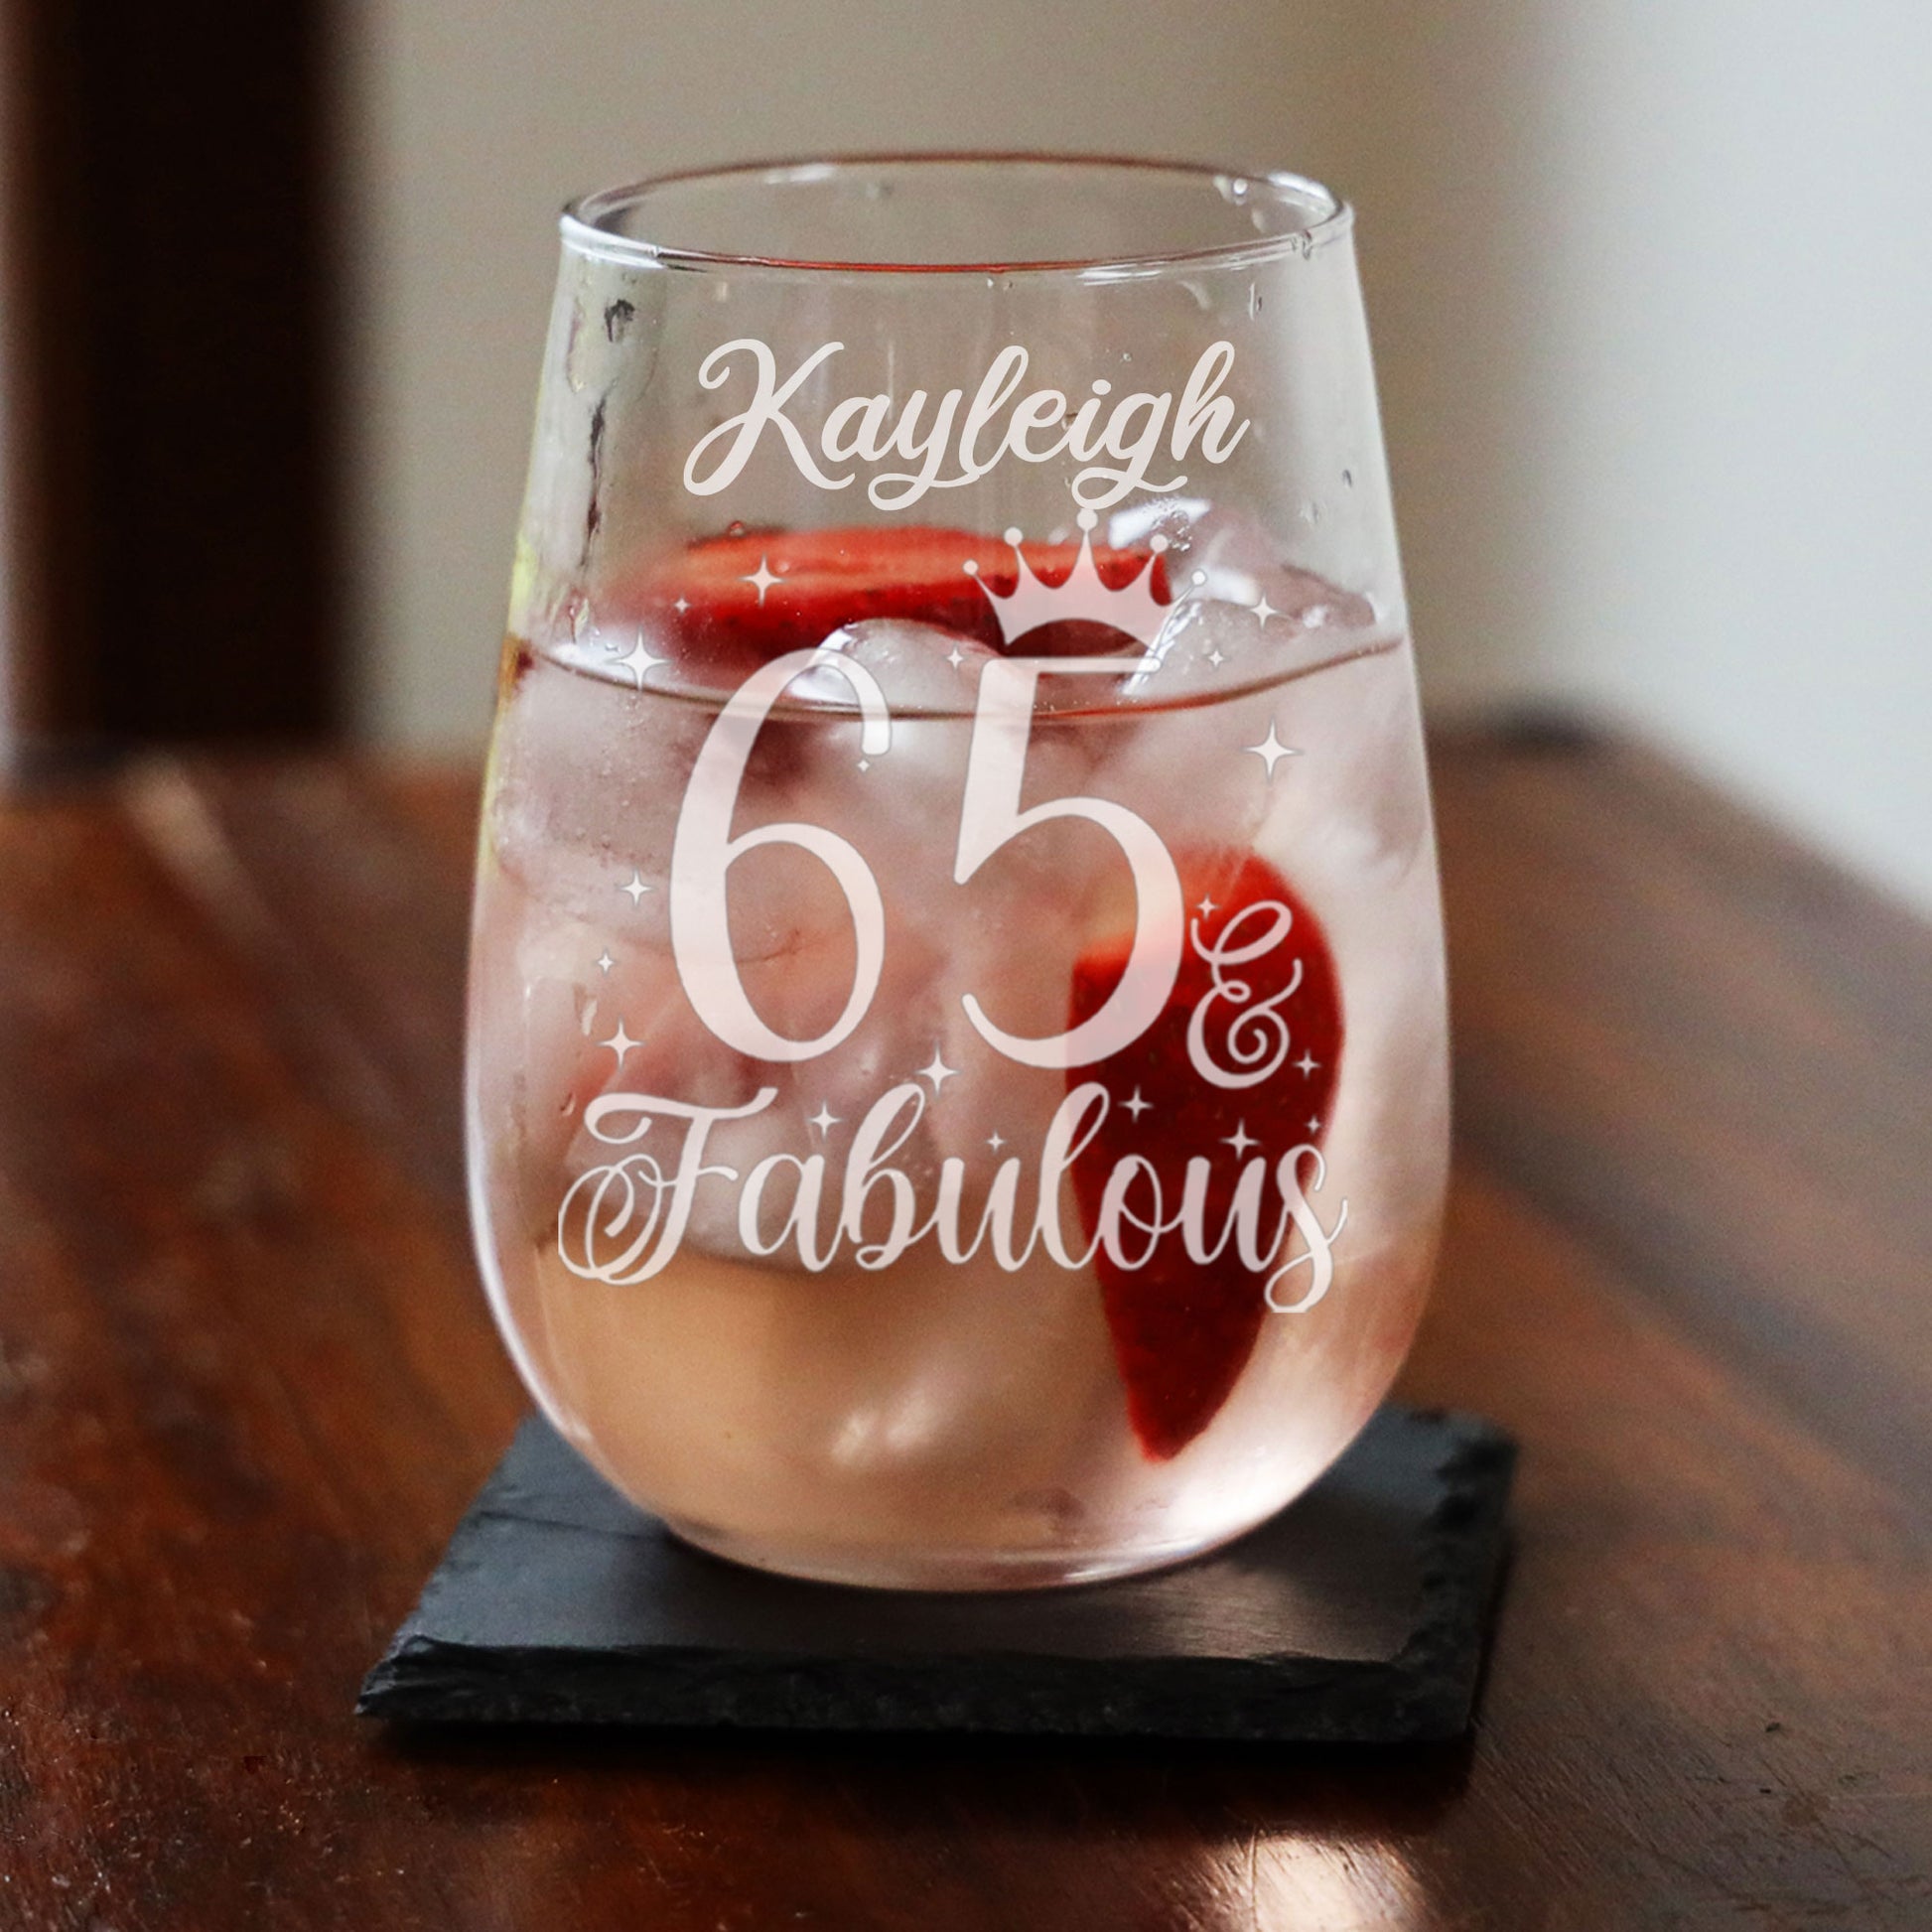 65 & Fabulous Engraved Stemless Gin Glass and/or Coaster Set  - Always Looking Good -   